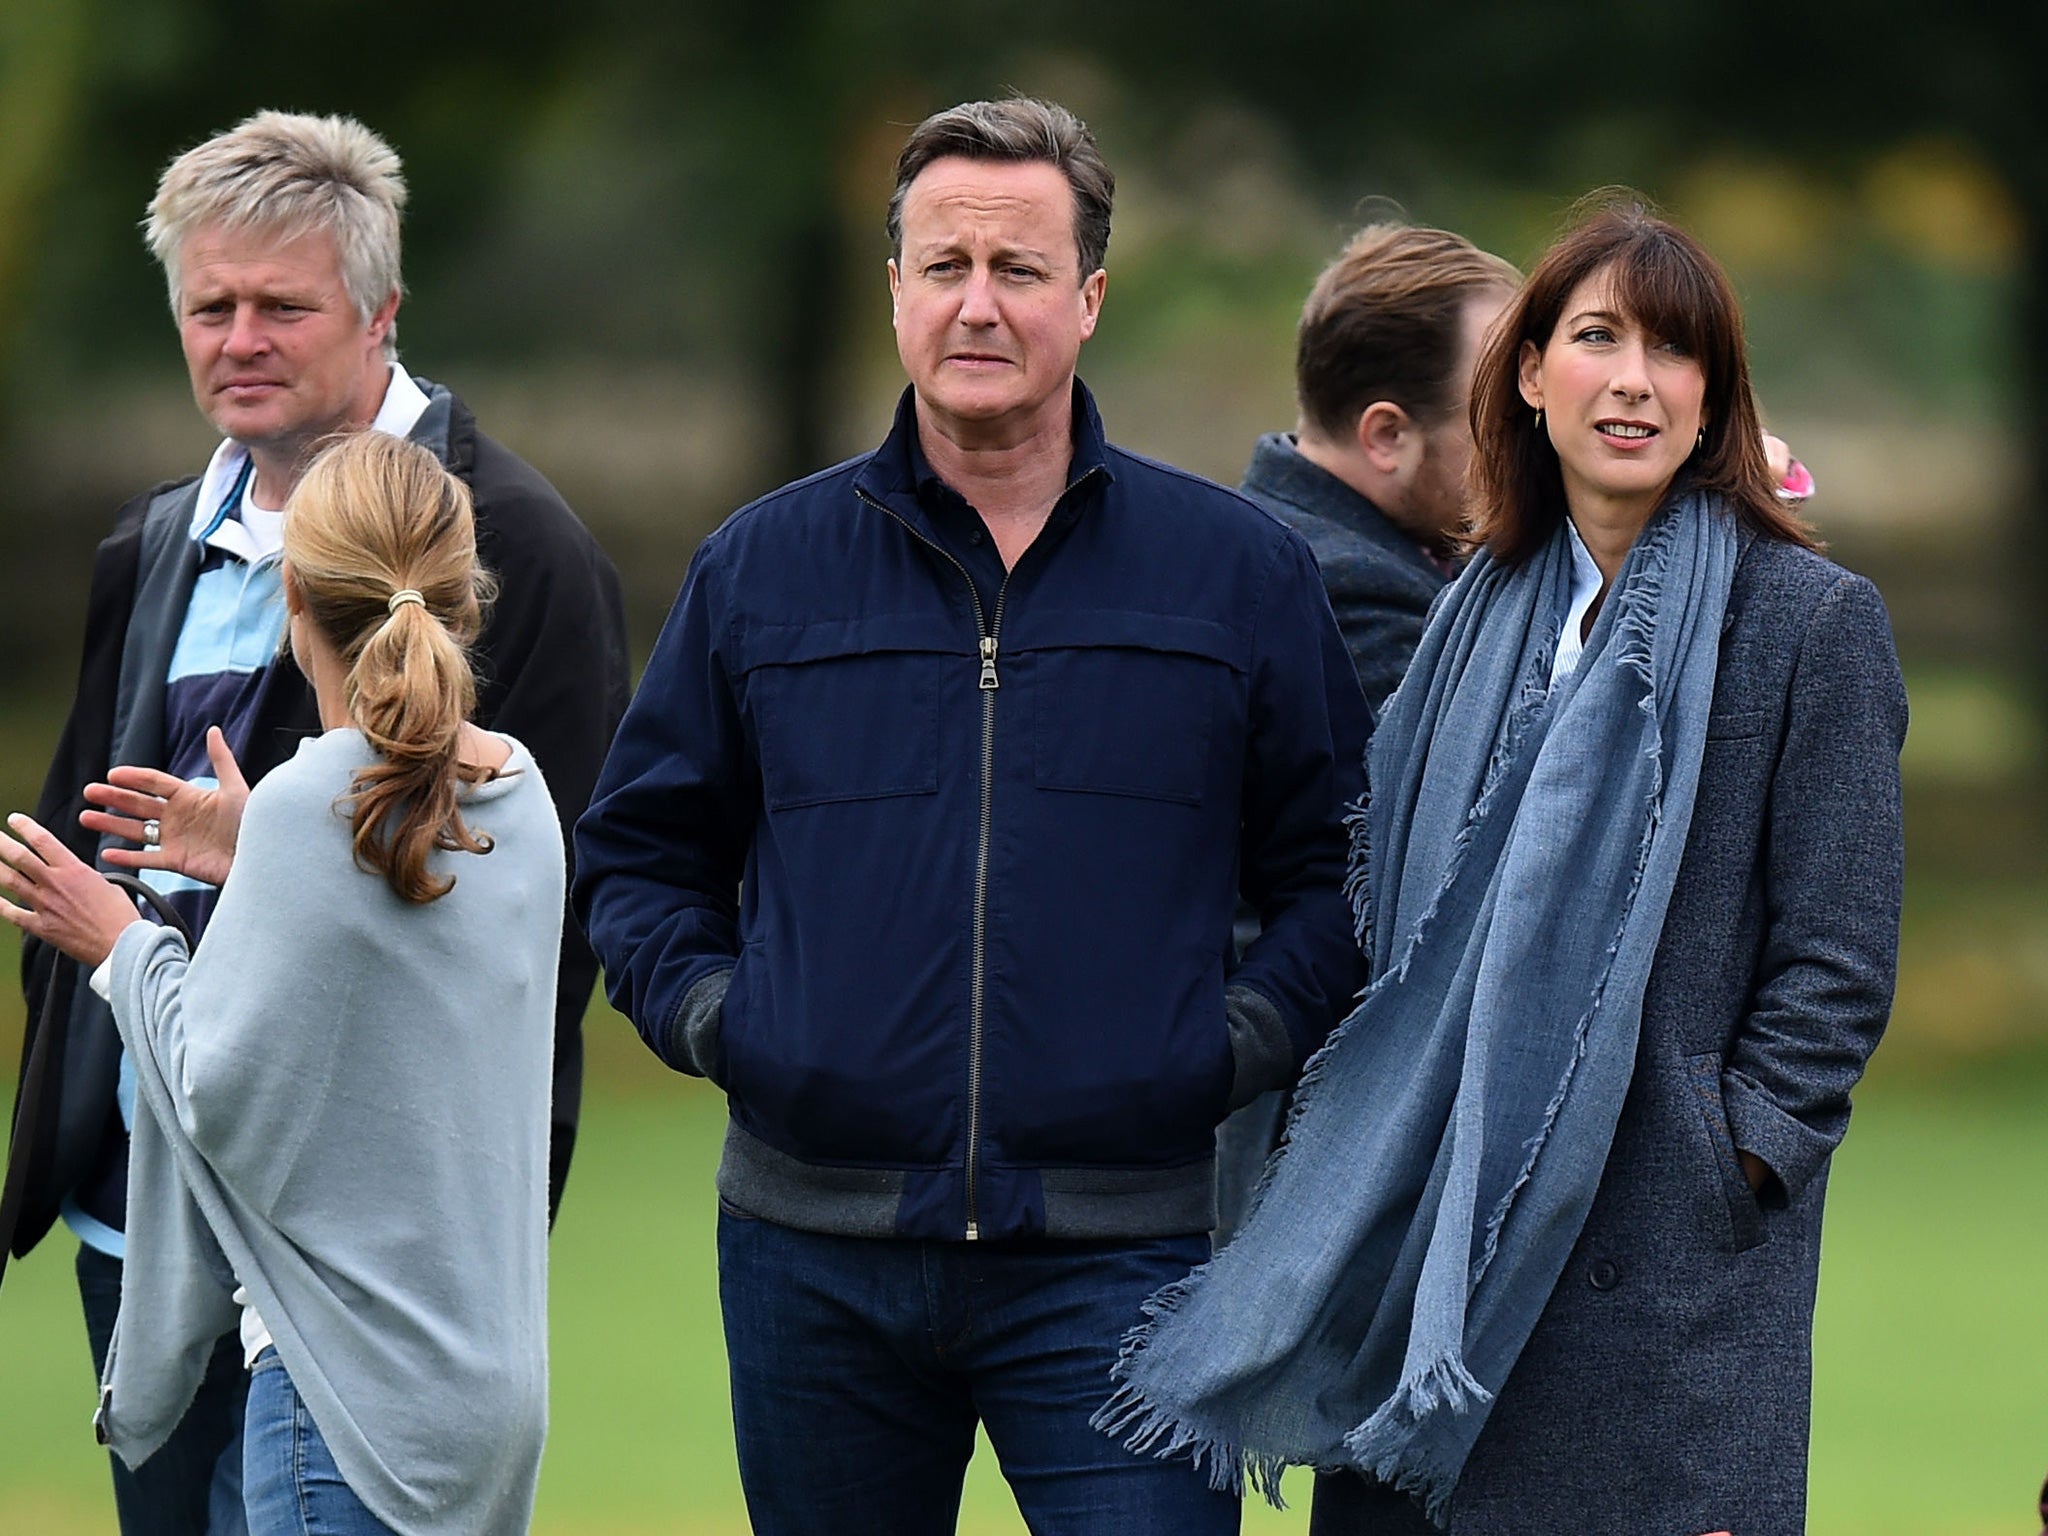 Cameron made a pledge to working parents that they would have access to 30 hours a week of free childcare